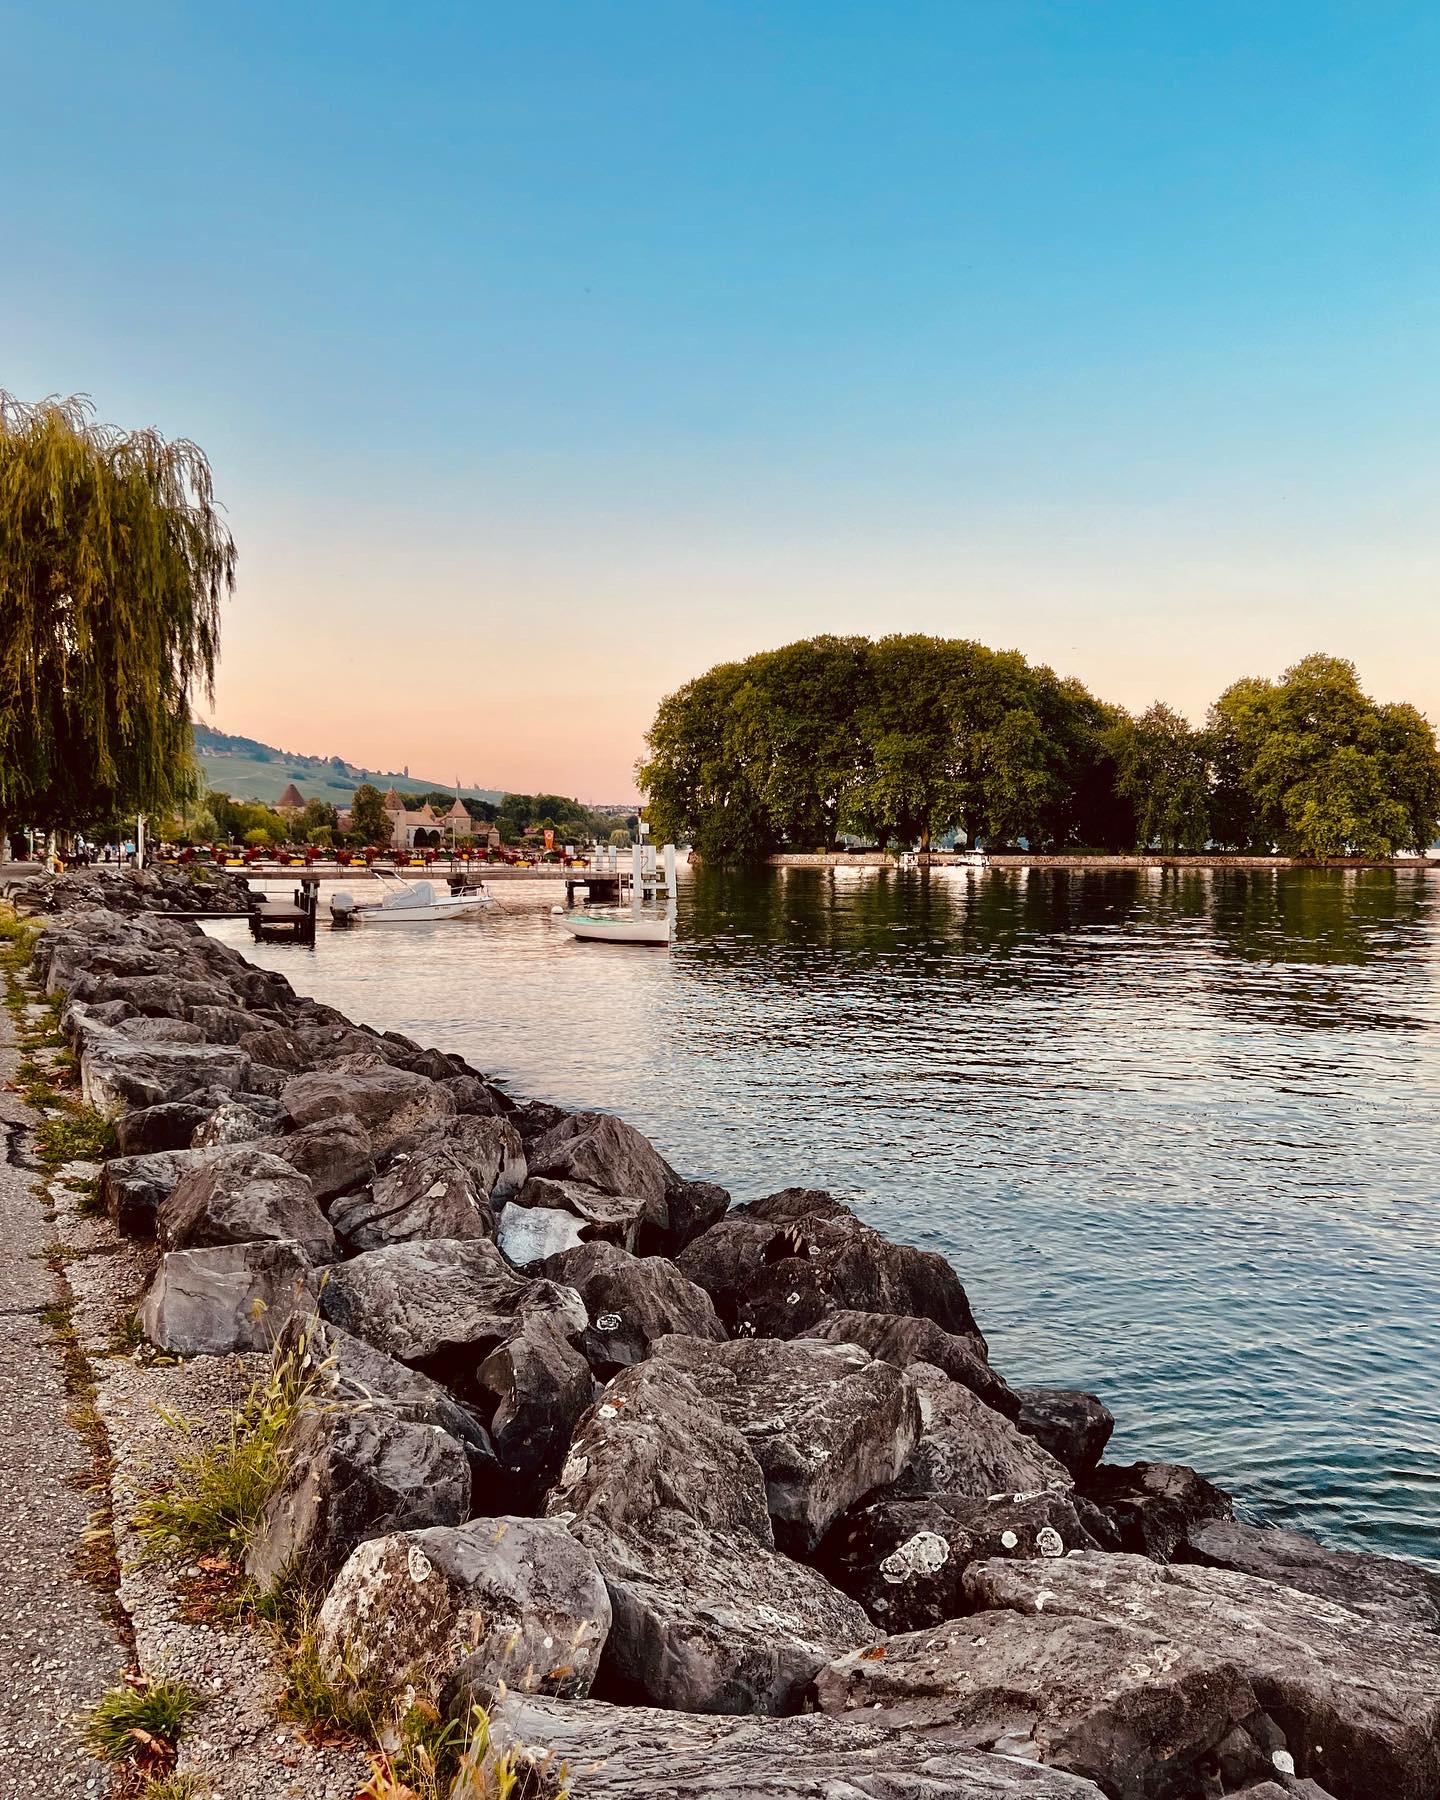 Rolle, The Pearl of the Geneva Lake